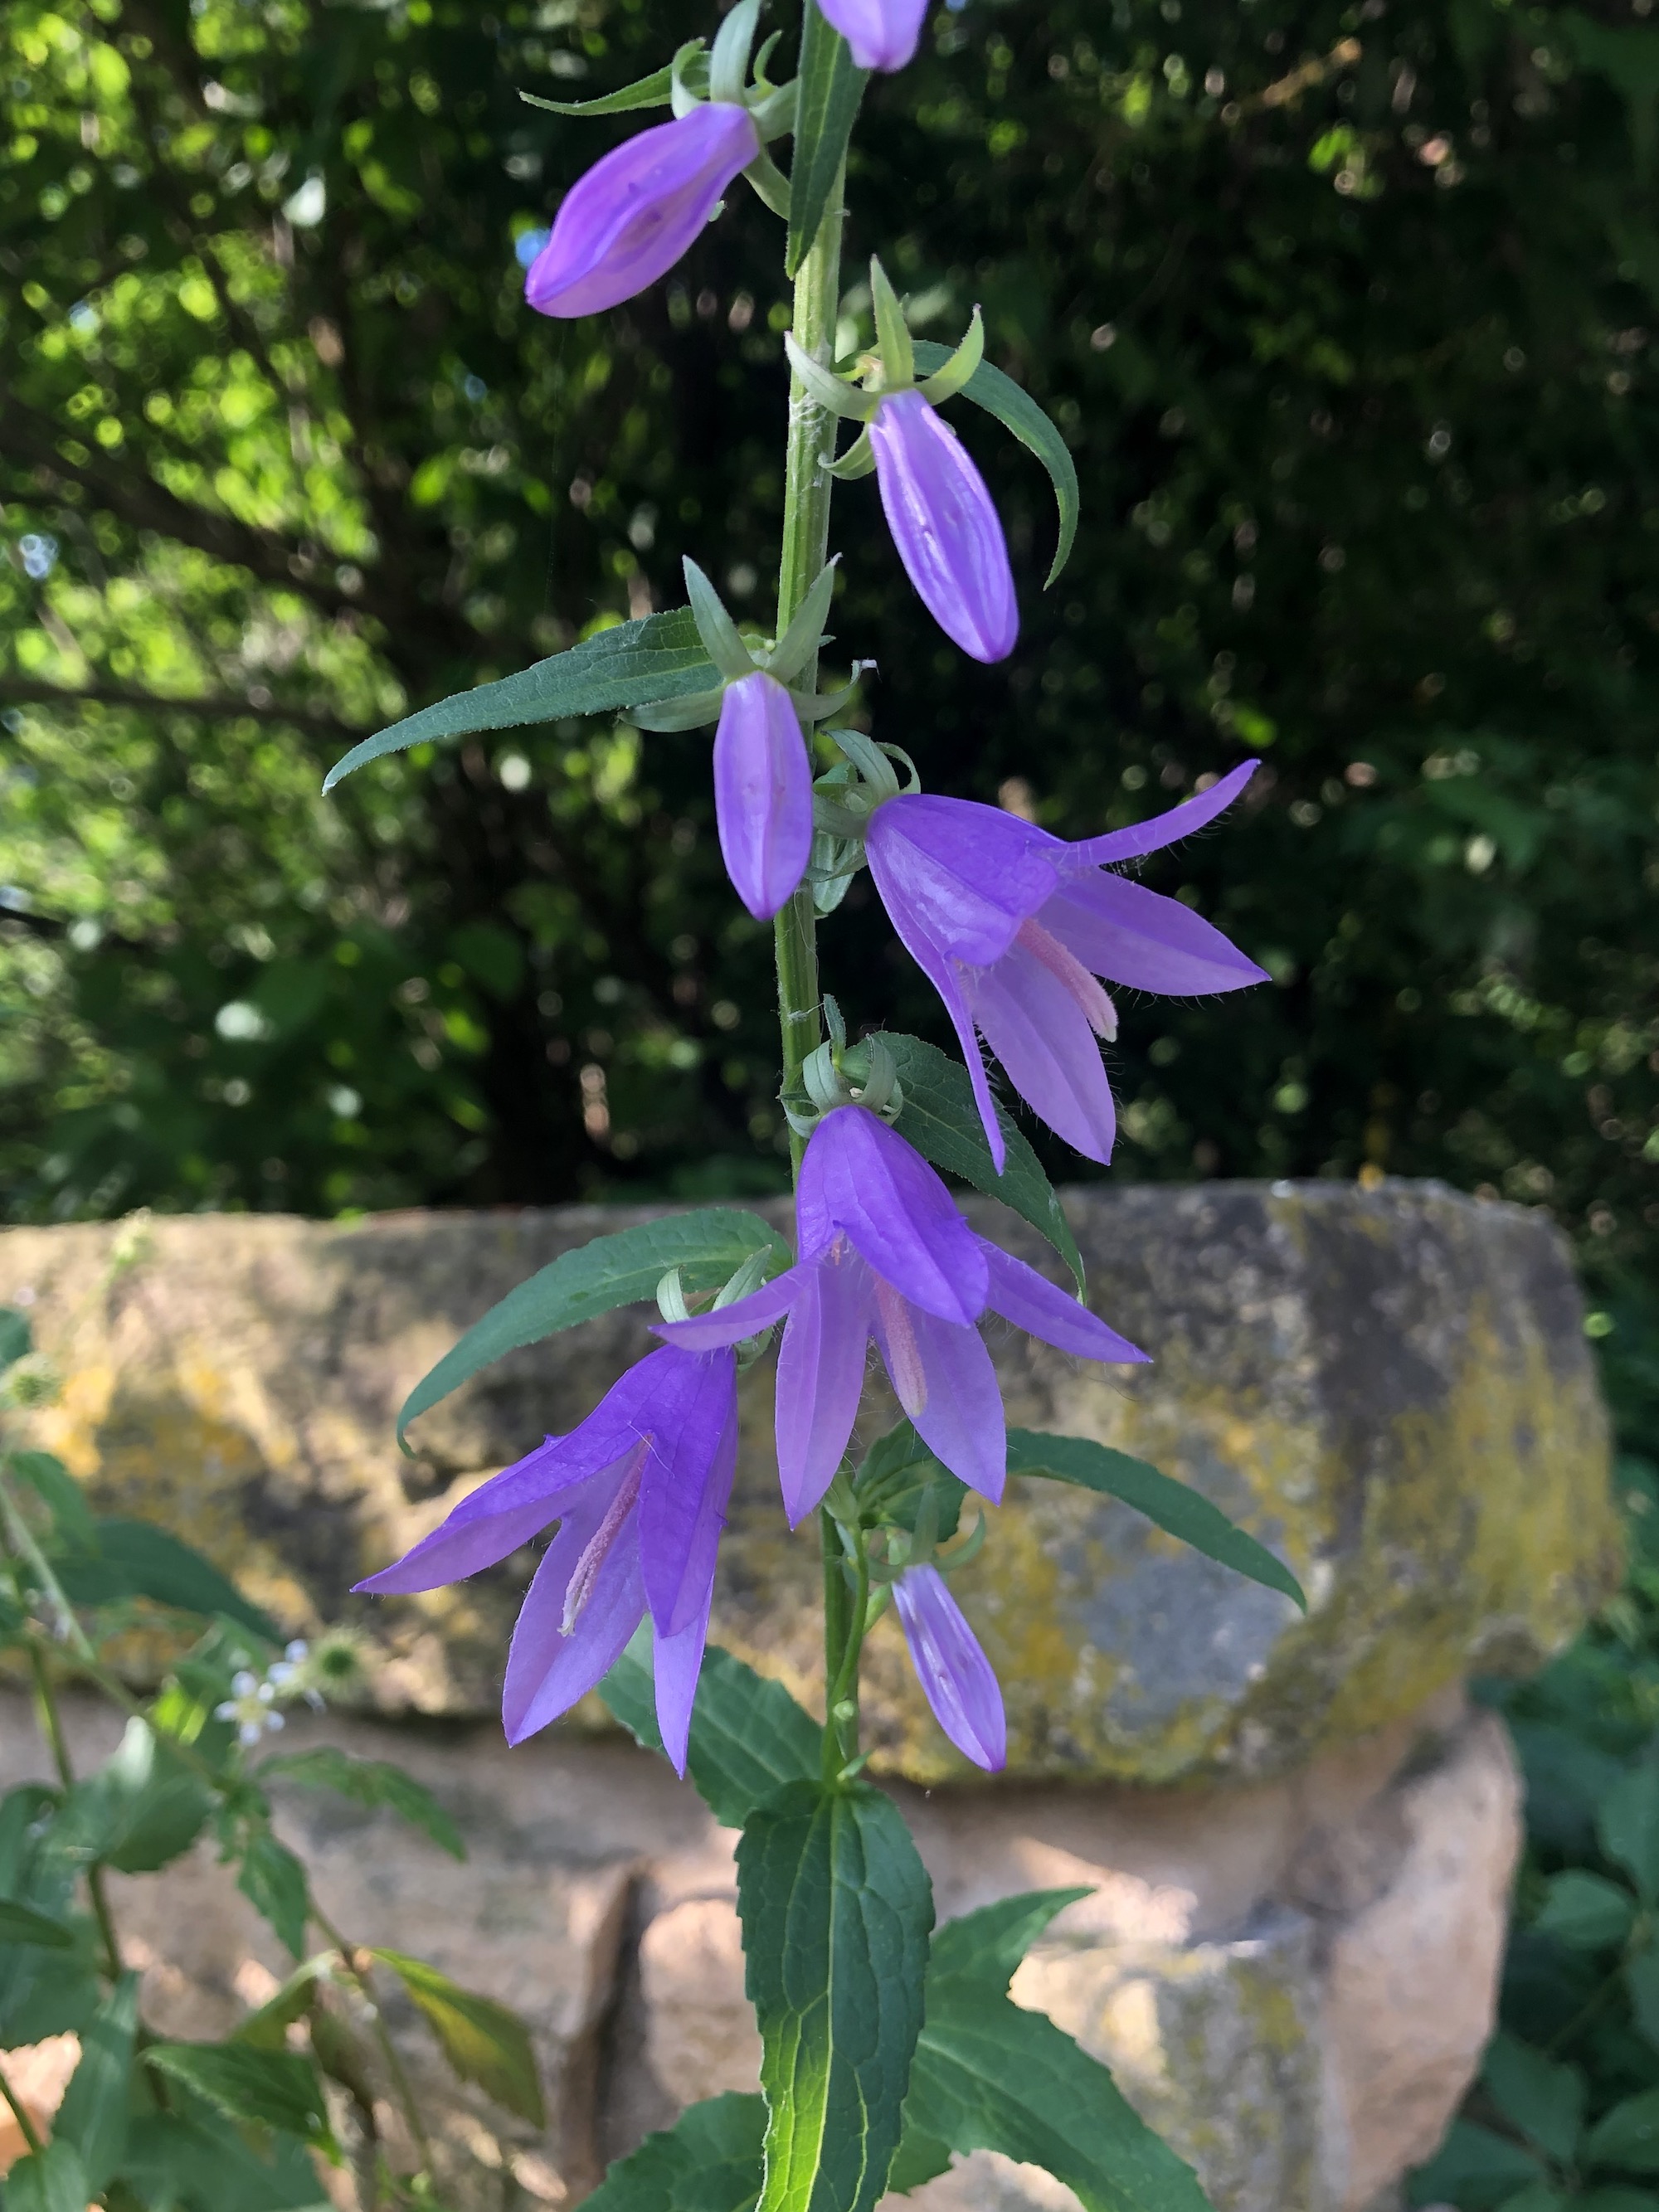 Creeping Bellflower by Duck Pond in Madison, Wisconsin on June 28, 2020.